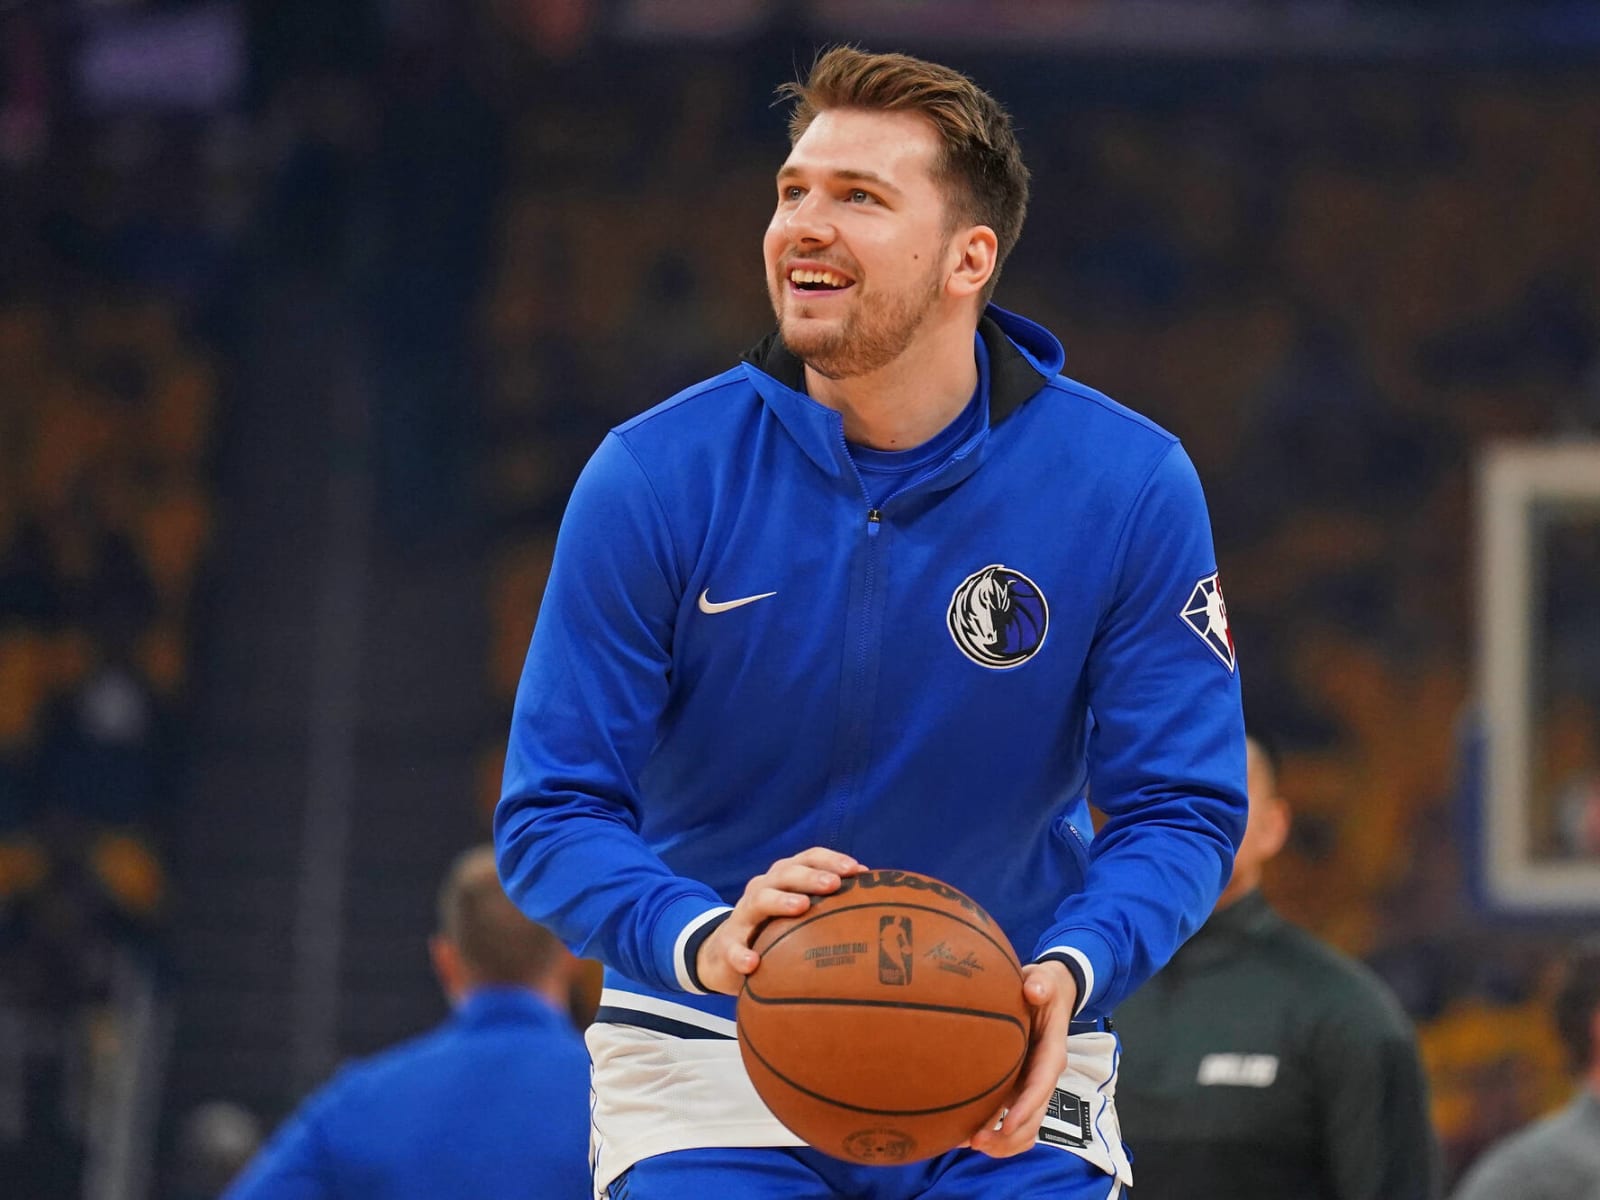 Basketball Twitter reacts to Luka Doncic's 47-point game against France:  'Golden era of European basketball